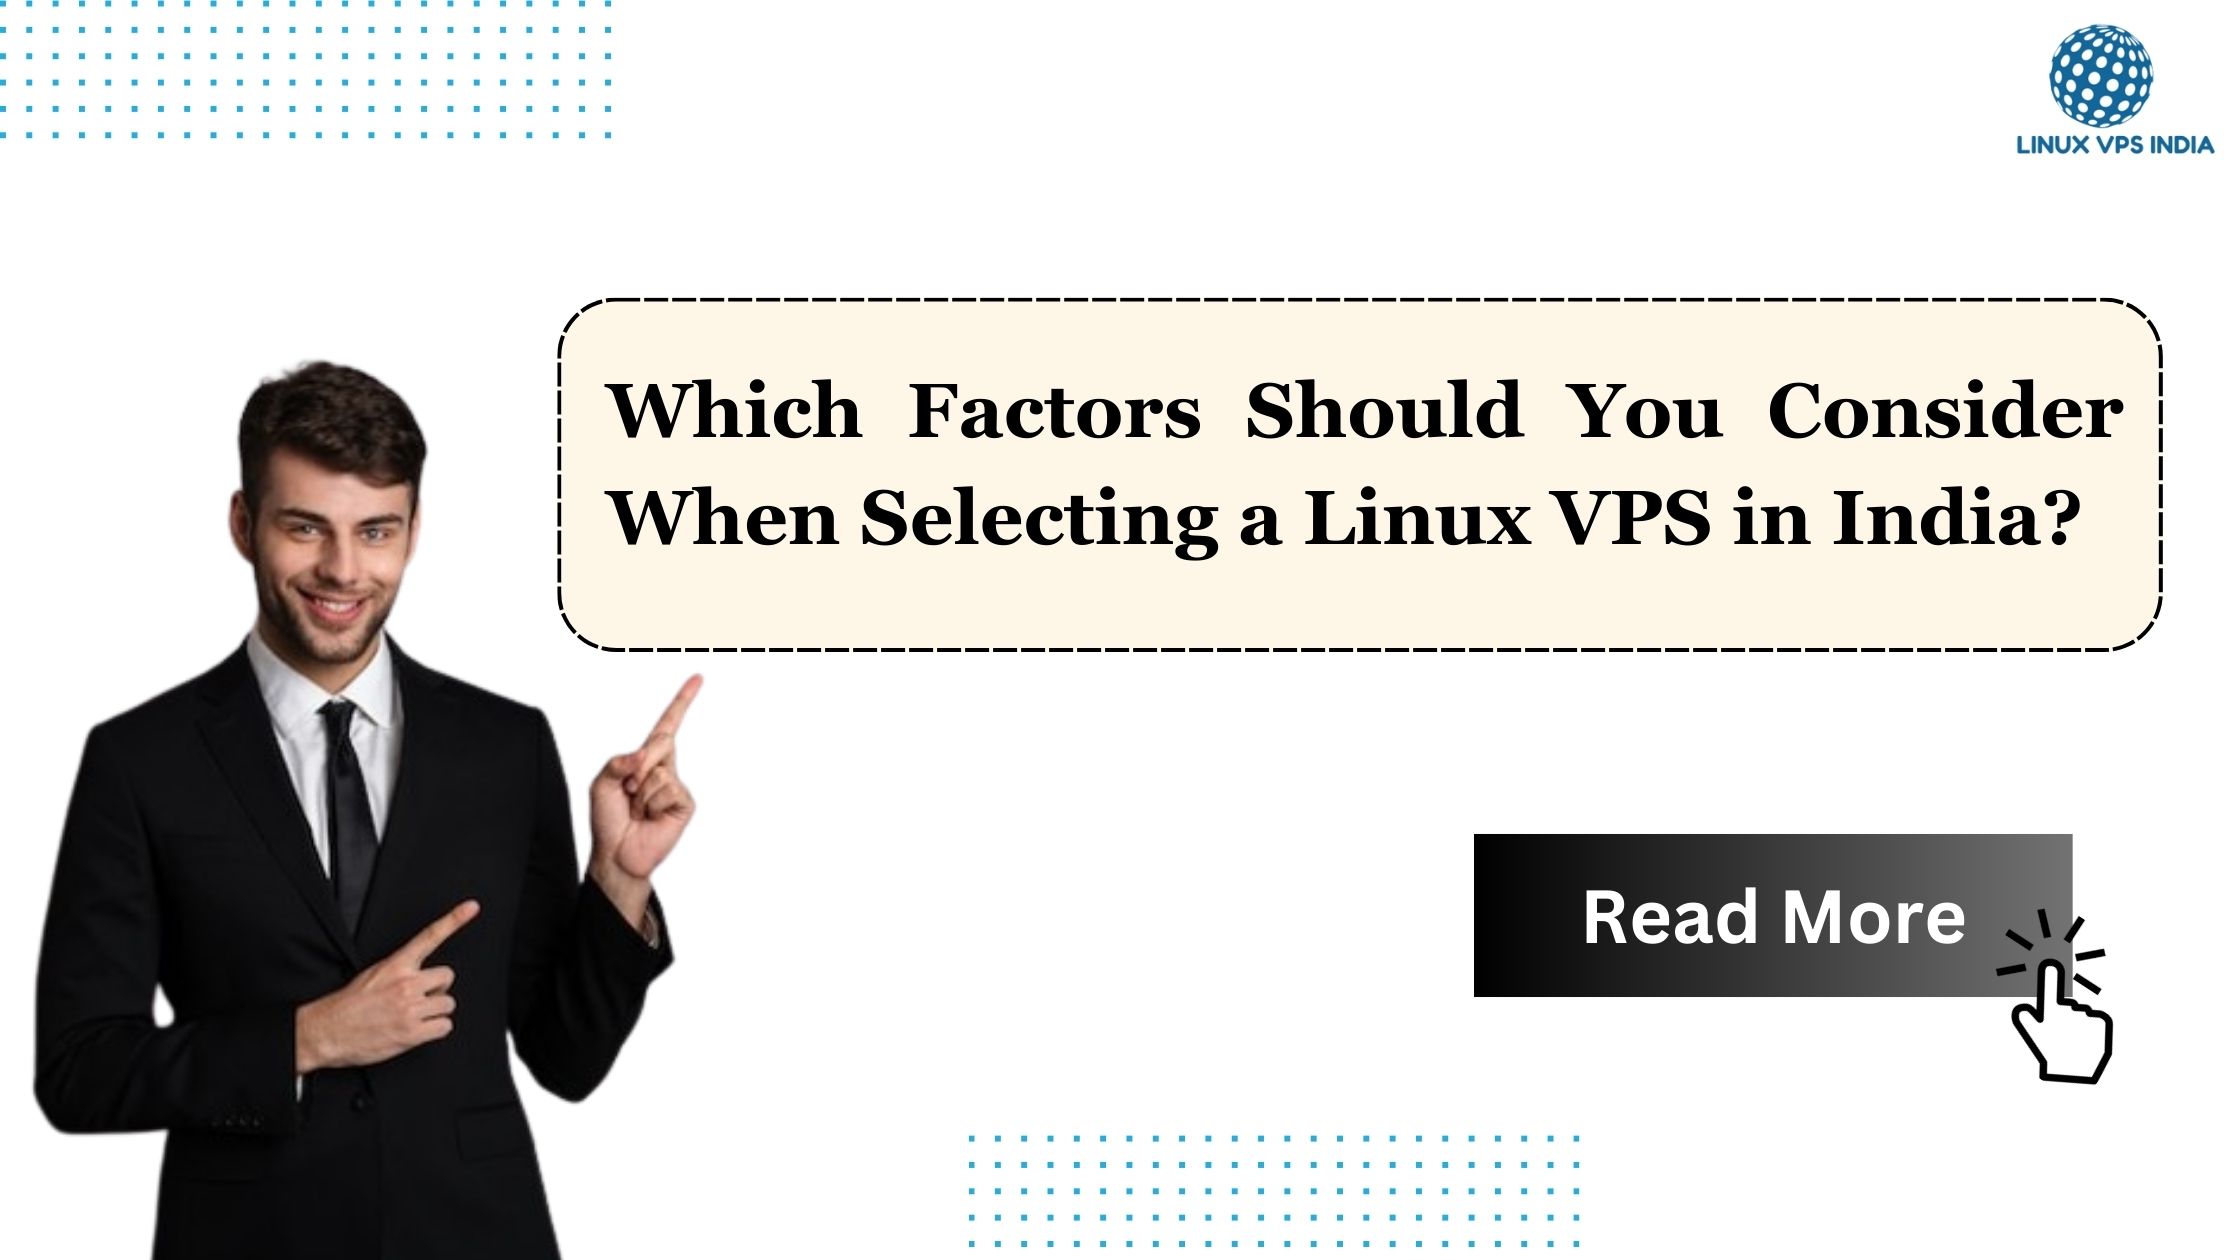 Which Factors Should You Consider When Selecting a Linux VPS in India